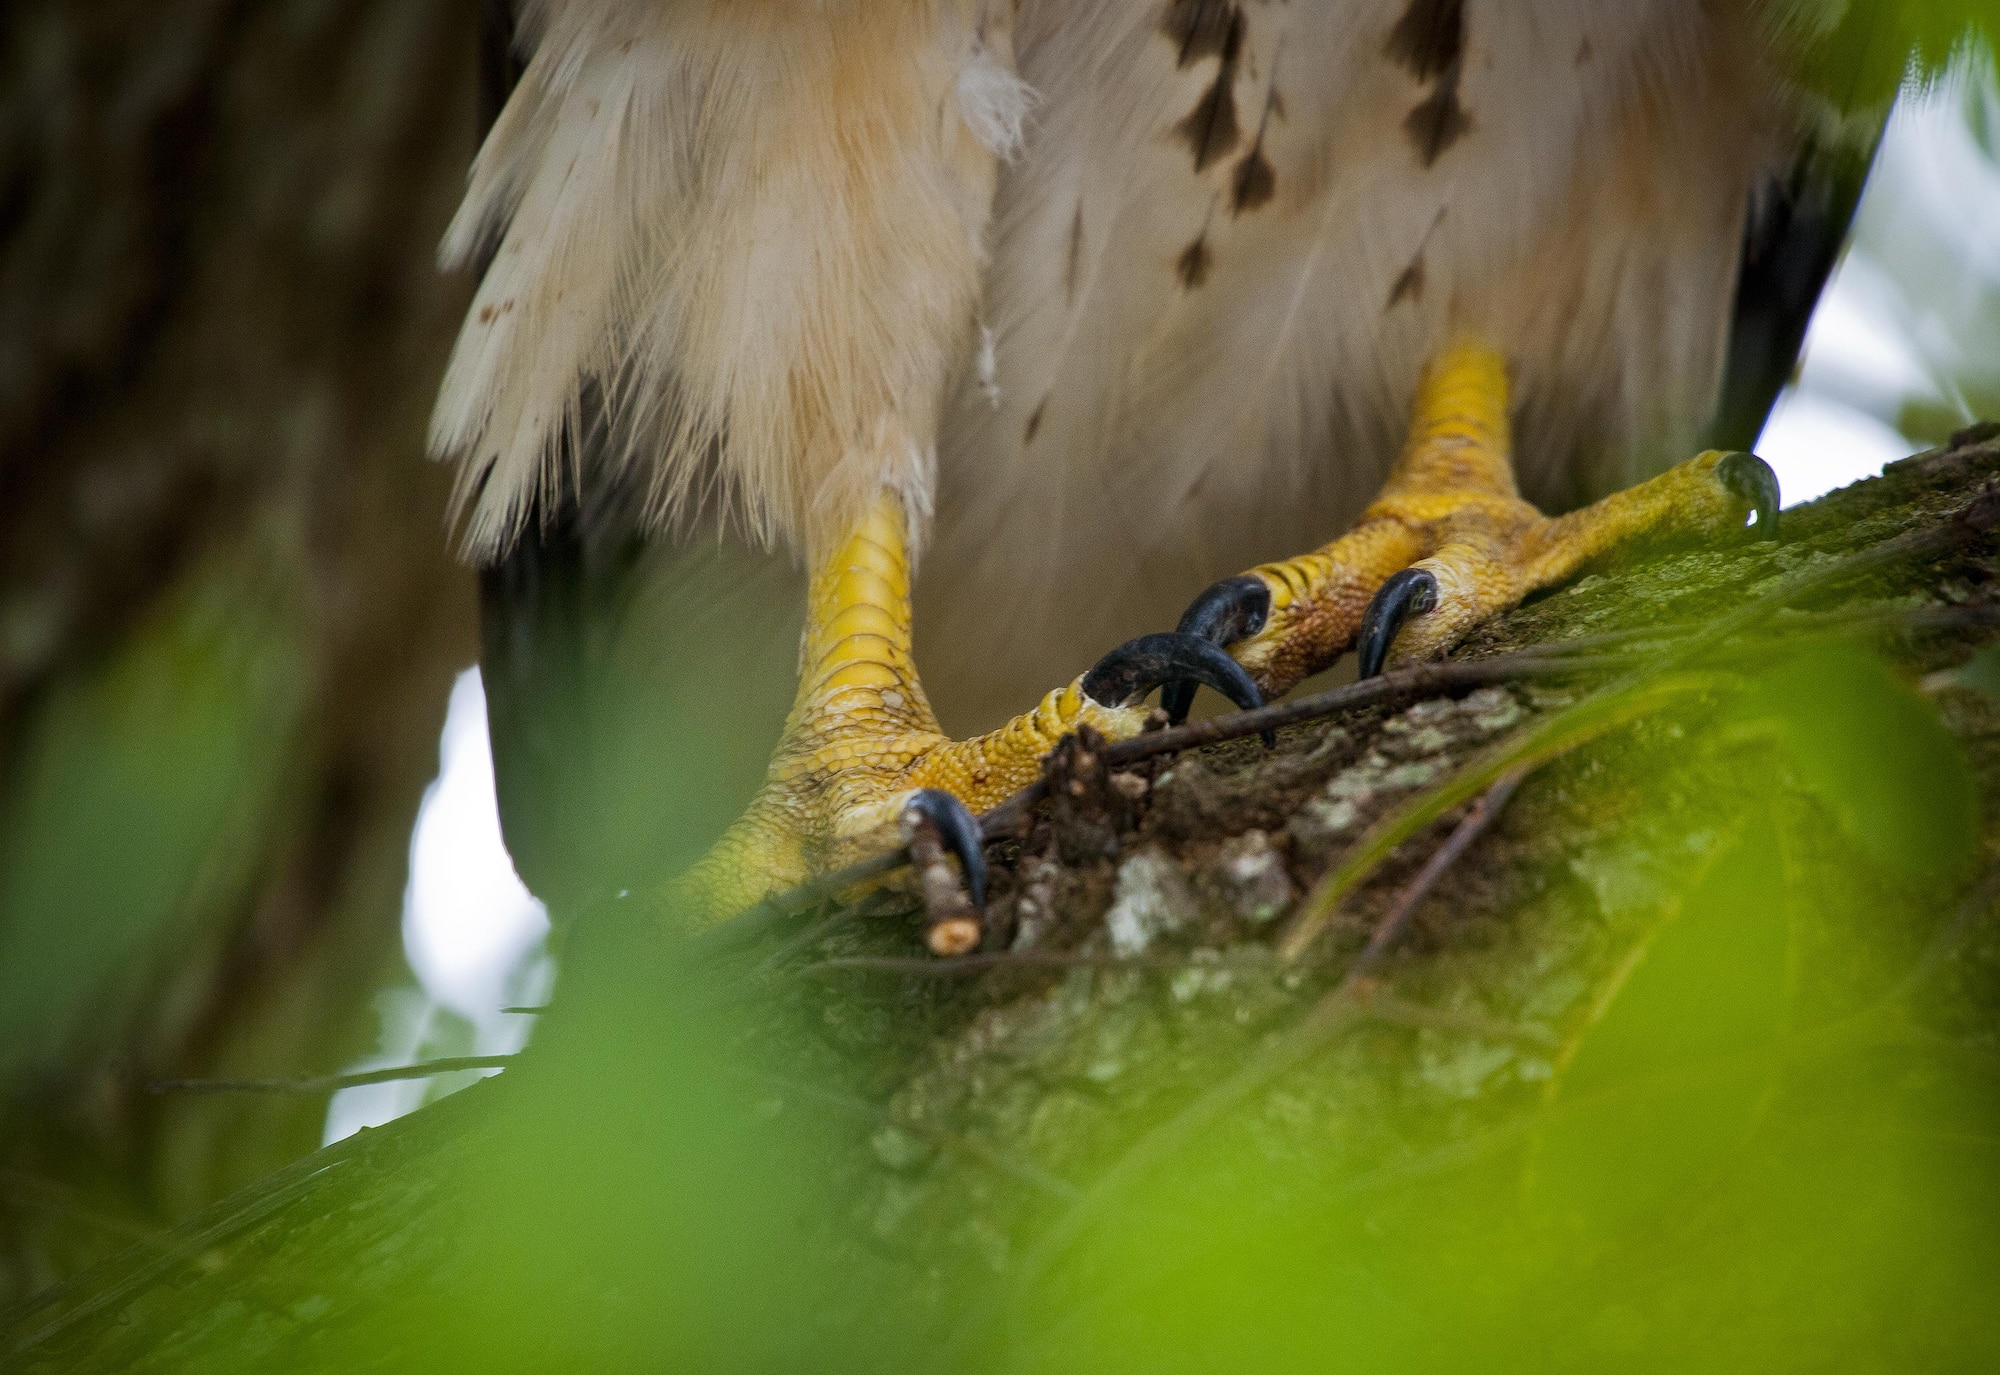 The talons of a red-tailed hawk grip the branch of a tree July 15 at Eglin Air Force Base, Fla.  This bird of prey is just one of many unique bird species located on the base and its outlying ranges.  (U.S. Air Force photo/Samuel King Jr.)